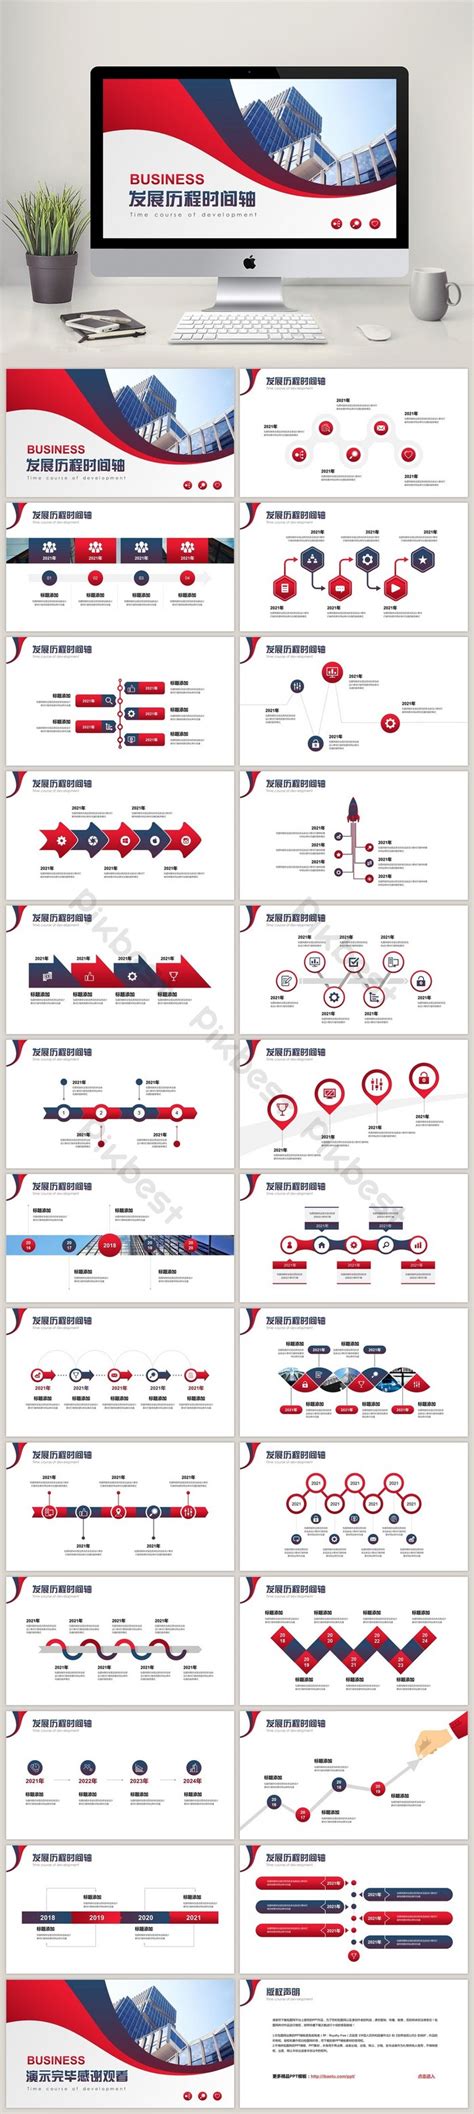 Red And Blue Corporate Development History Timeline Ppt Template